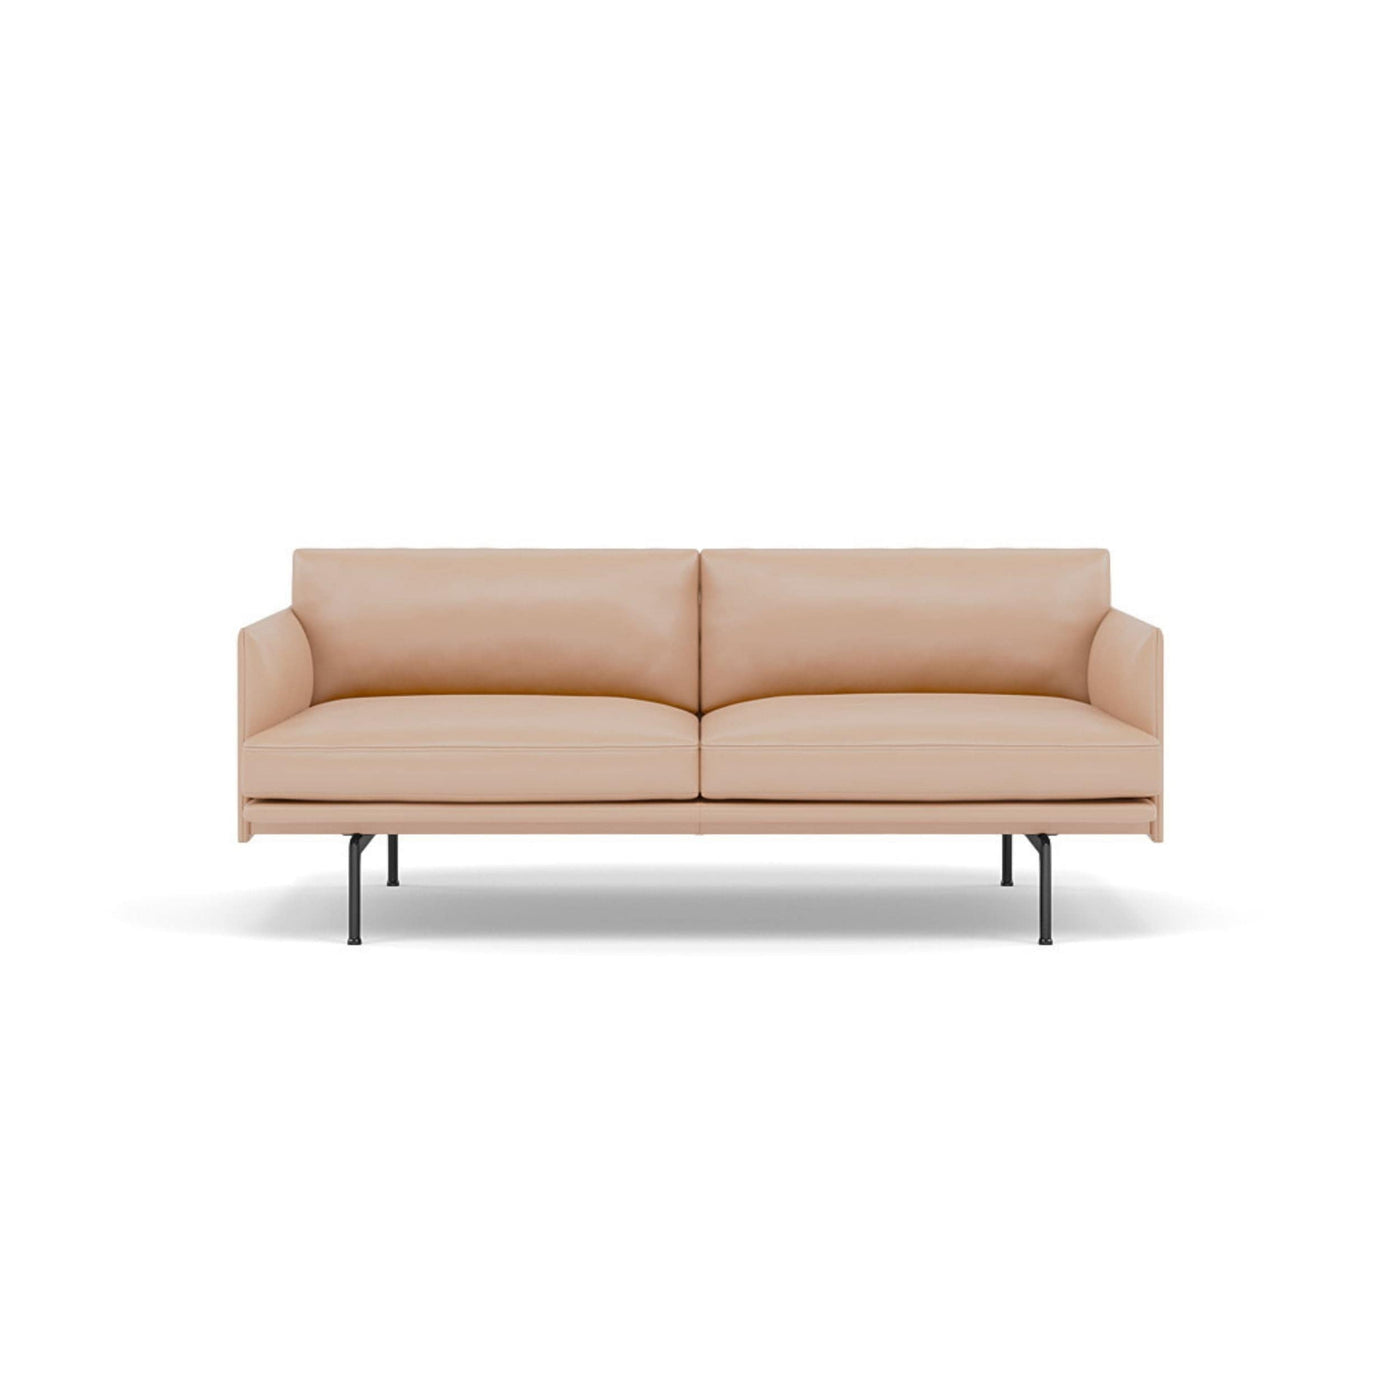 Muuto Outline 2 Seater sofa in beige refine leather and black legs. Made to order from someday designs. #colour_beige-refine-leather